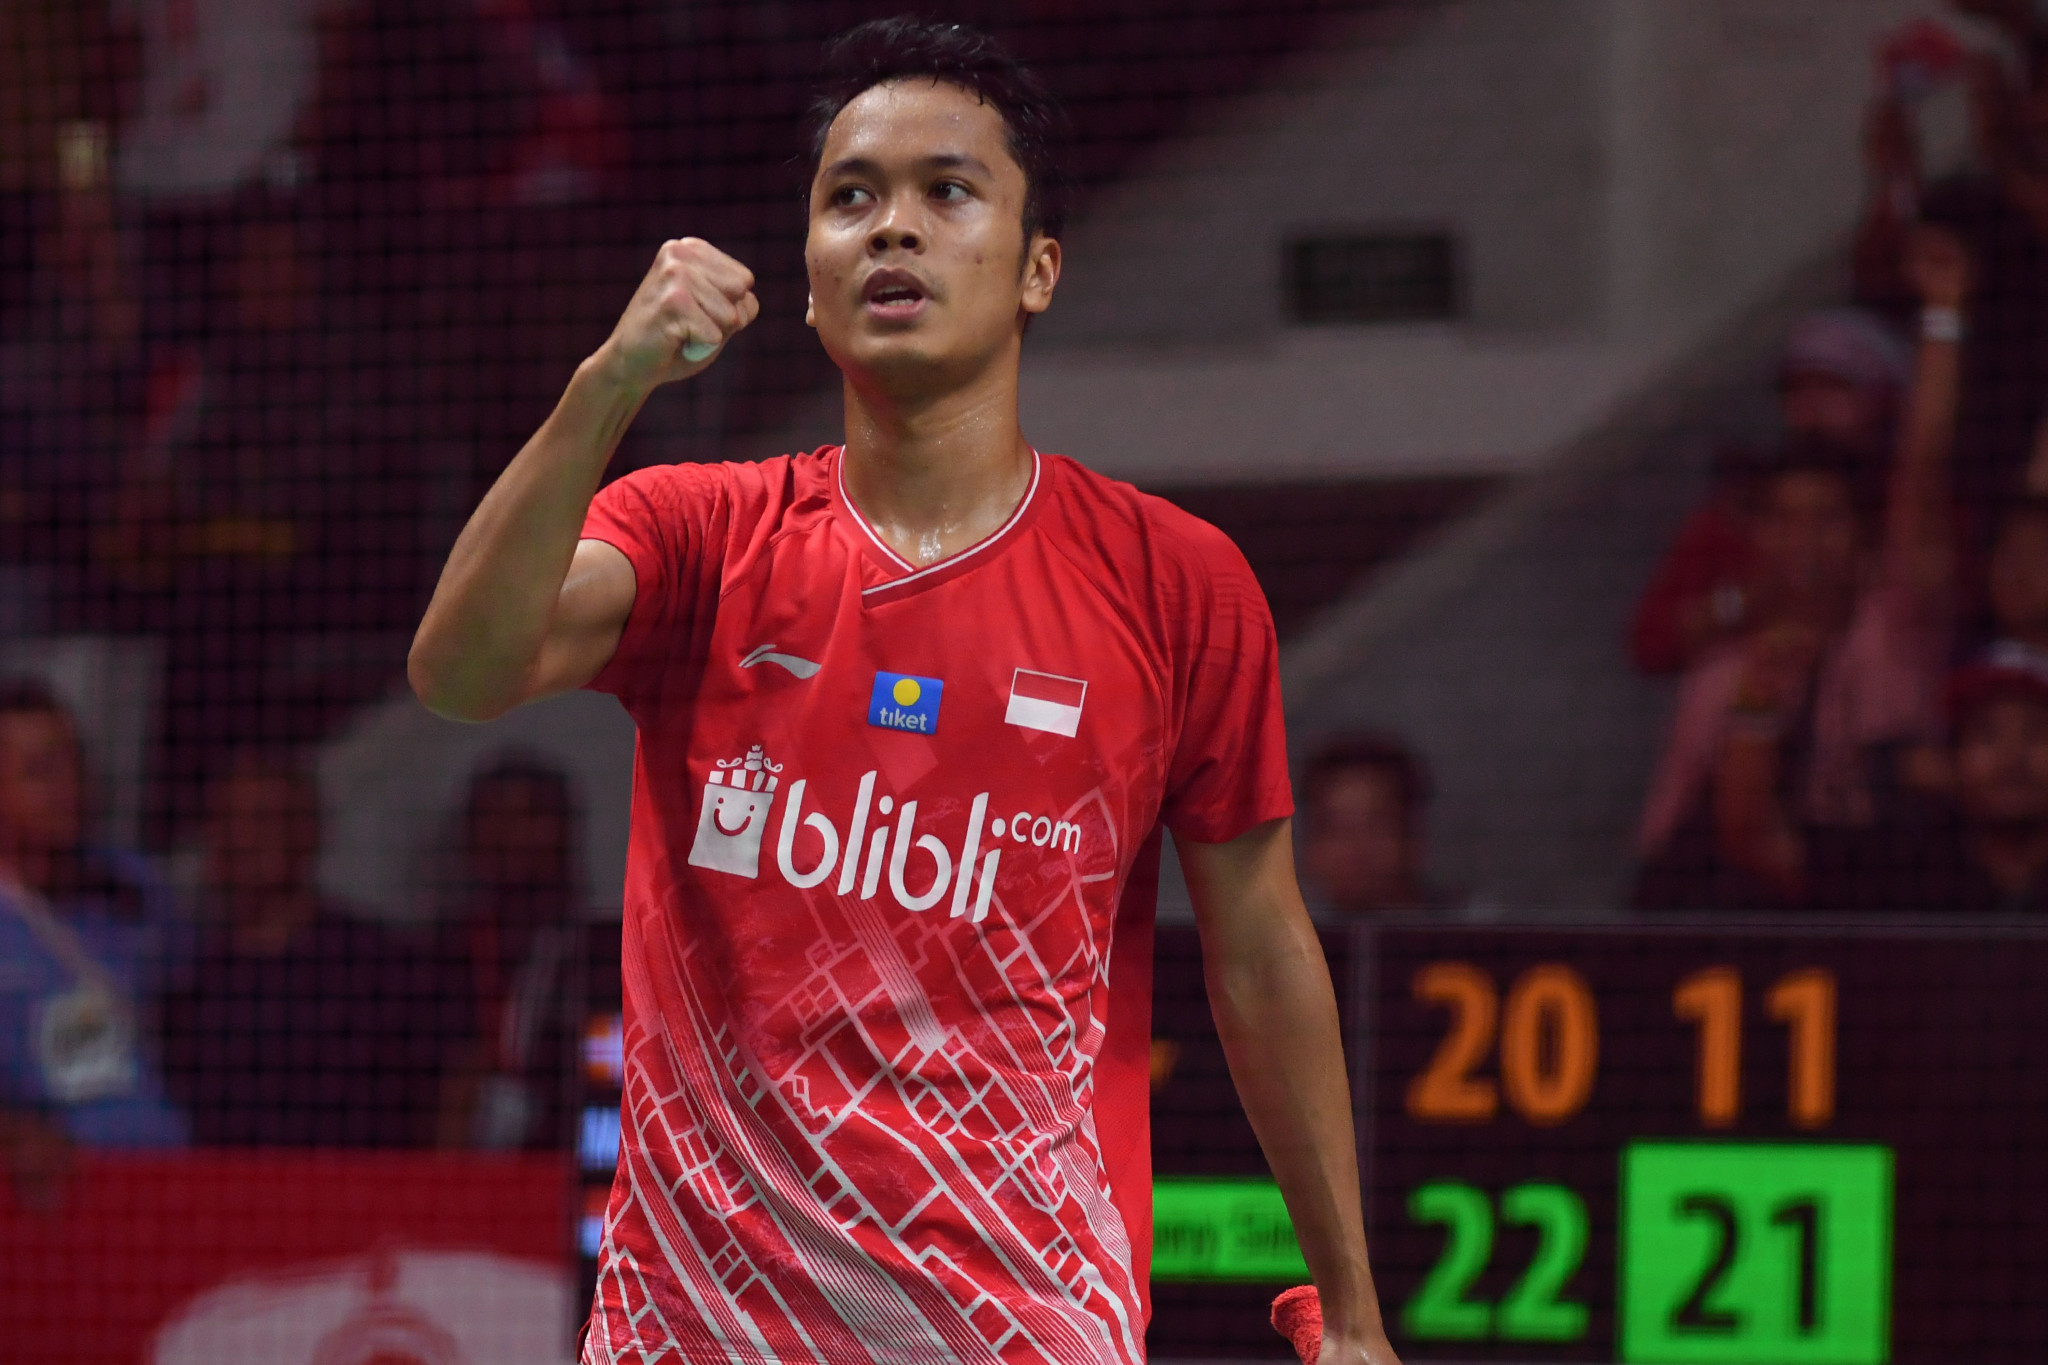 Home player Ginting to face defending champion Antonsen in BWF Indonesia Masters final